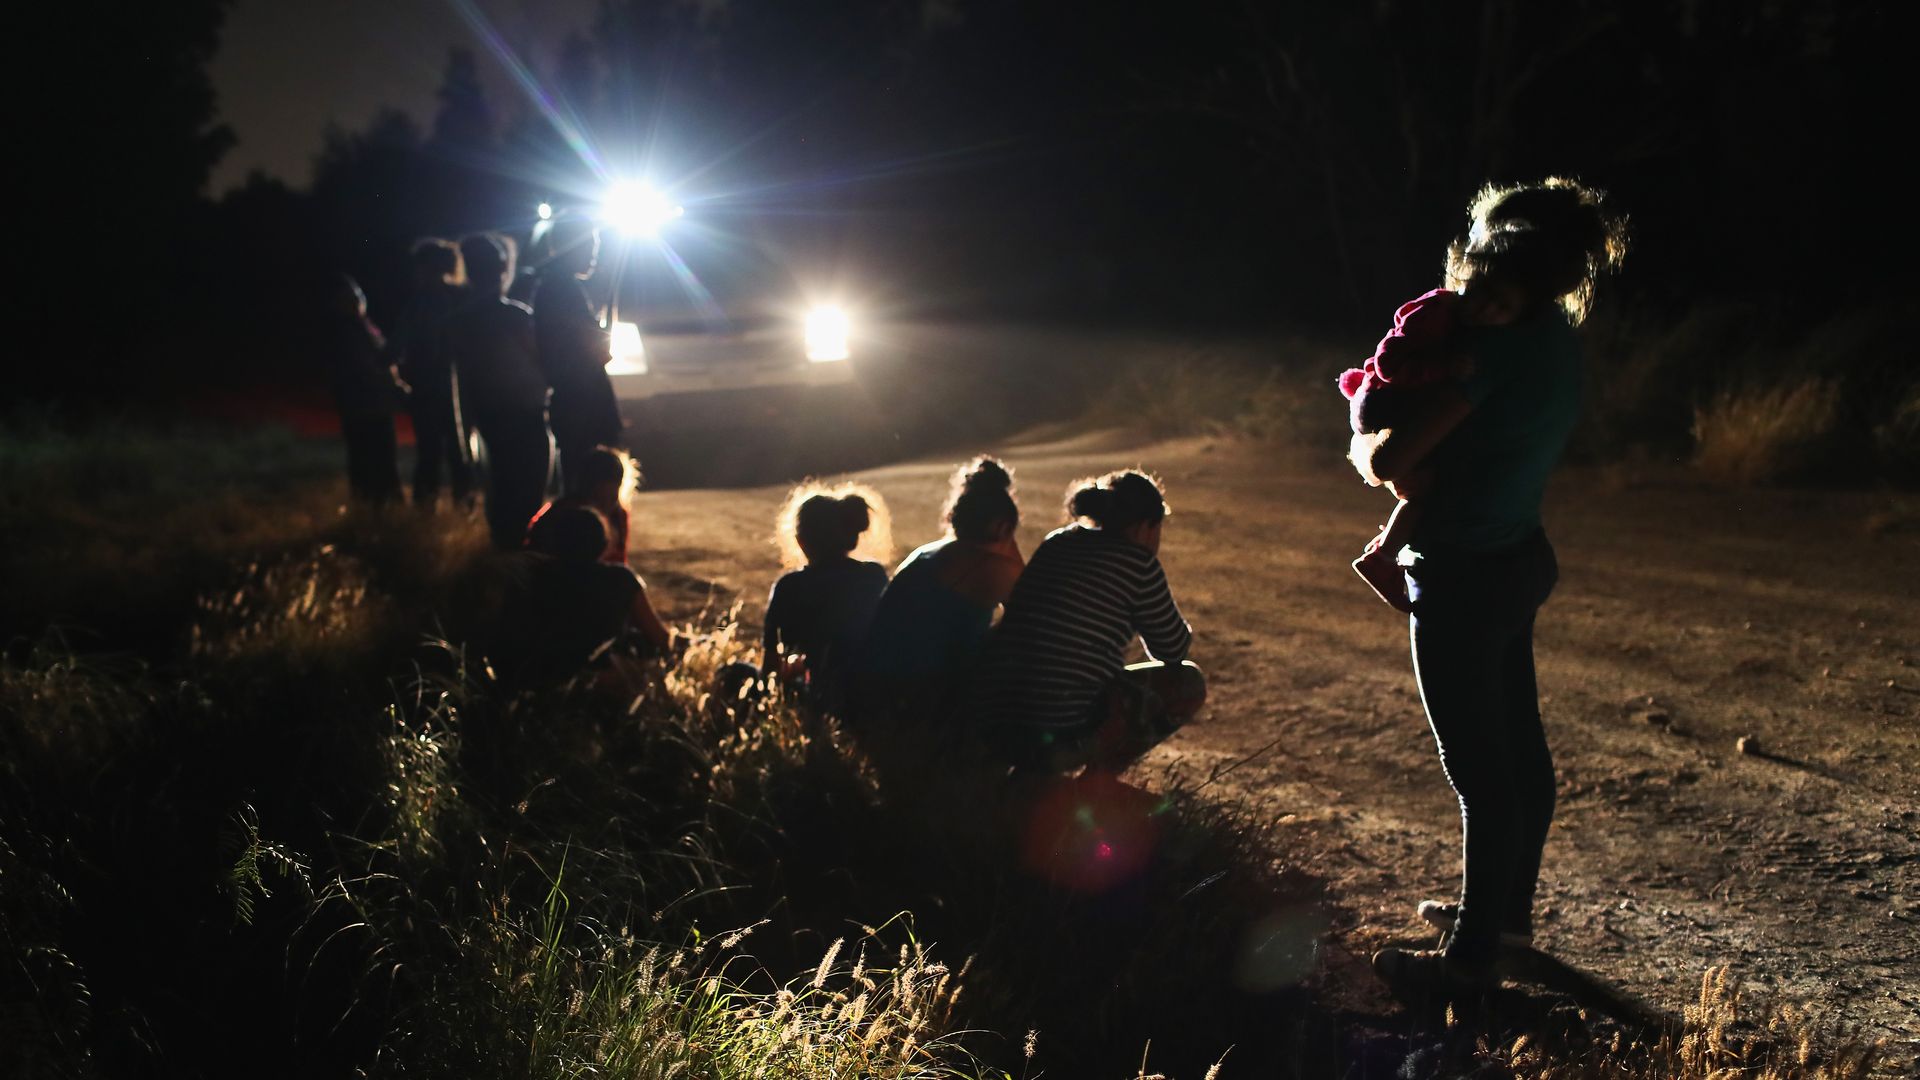 U.S. Border Patrol agents arrive to detain a group of Central American asylum seekers near the U.S.-Mexico border 